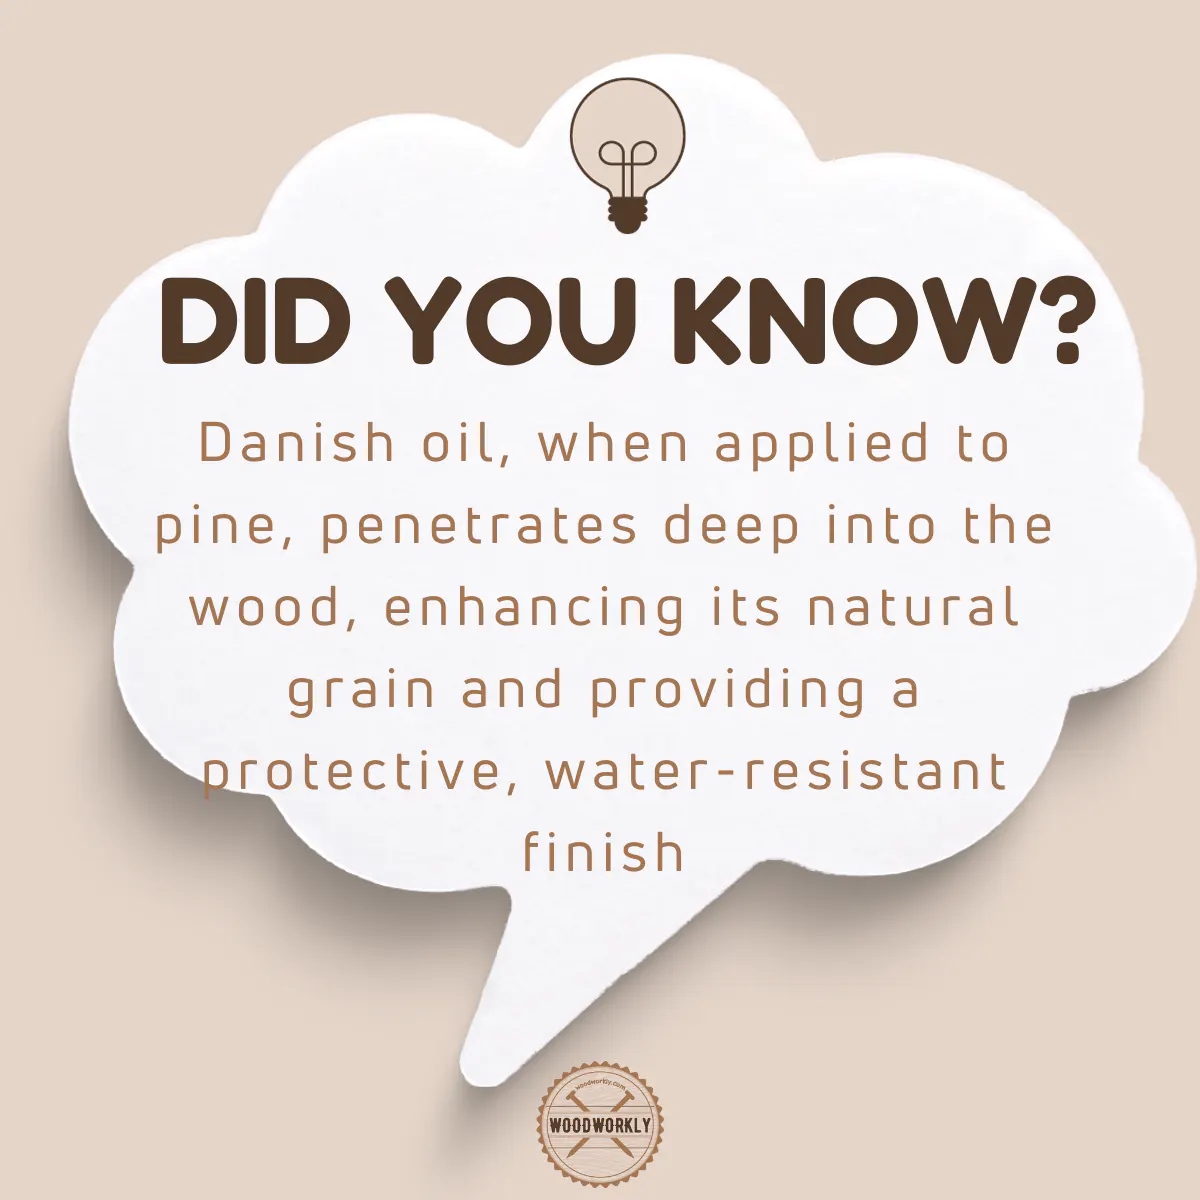 Did you know fact about using Danish oil on pine